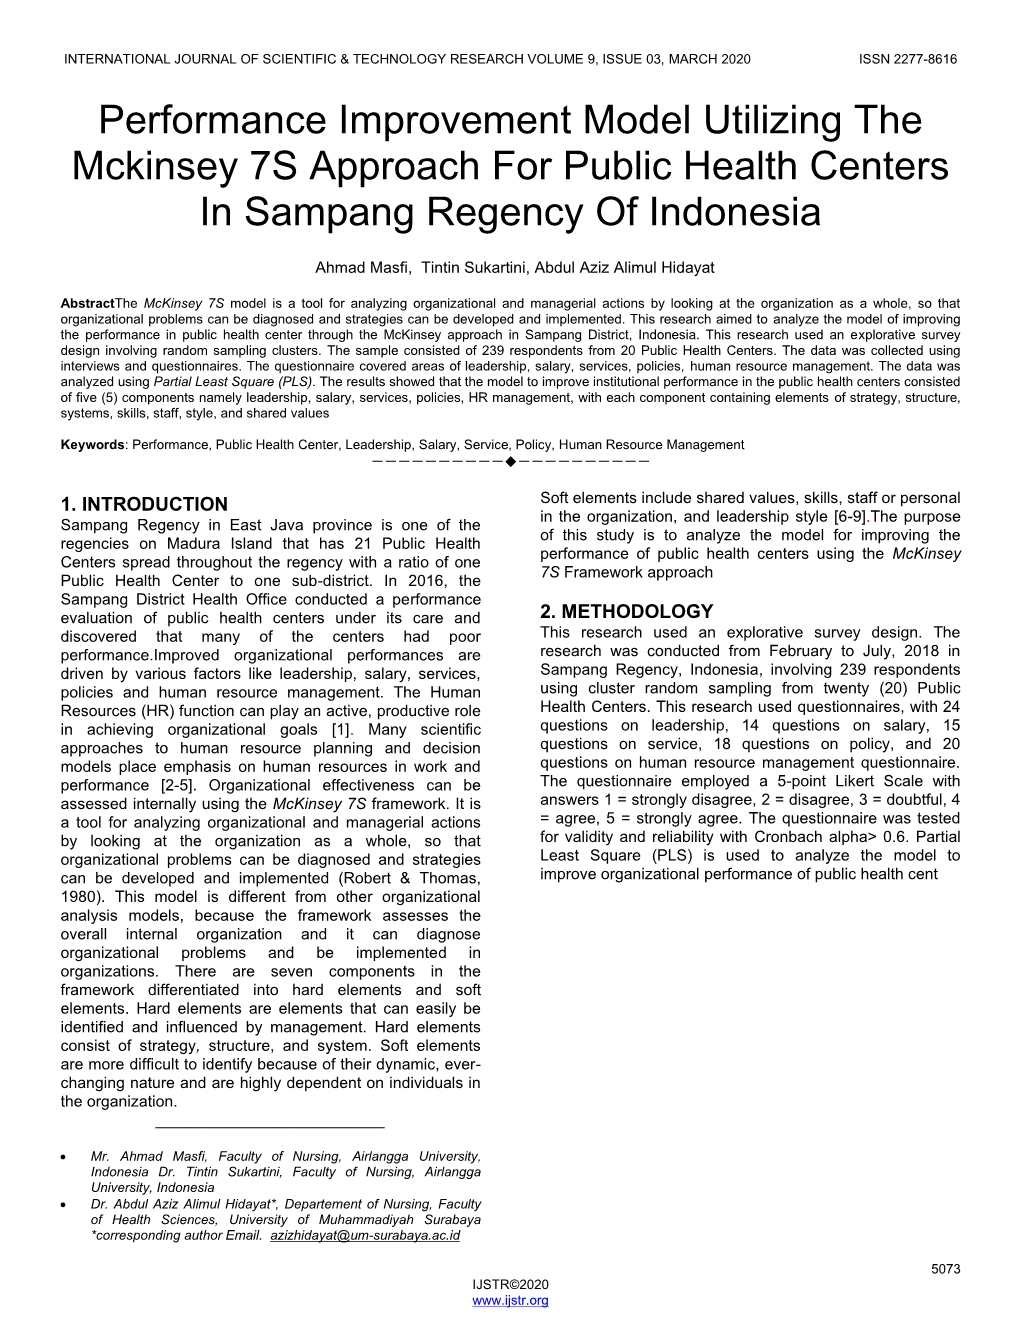 Performance Improvement Model Utilizing the Mckinsey 7S Approach for Public Health Centers in Sampang Regency of Indonesia